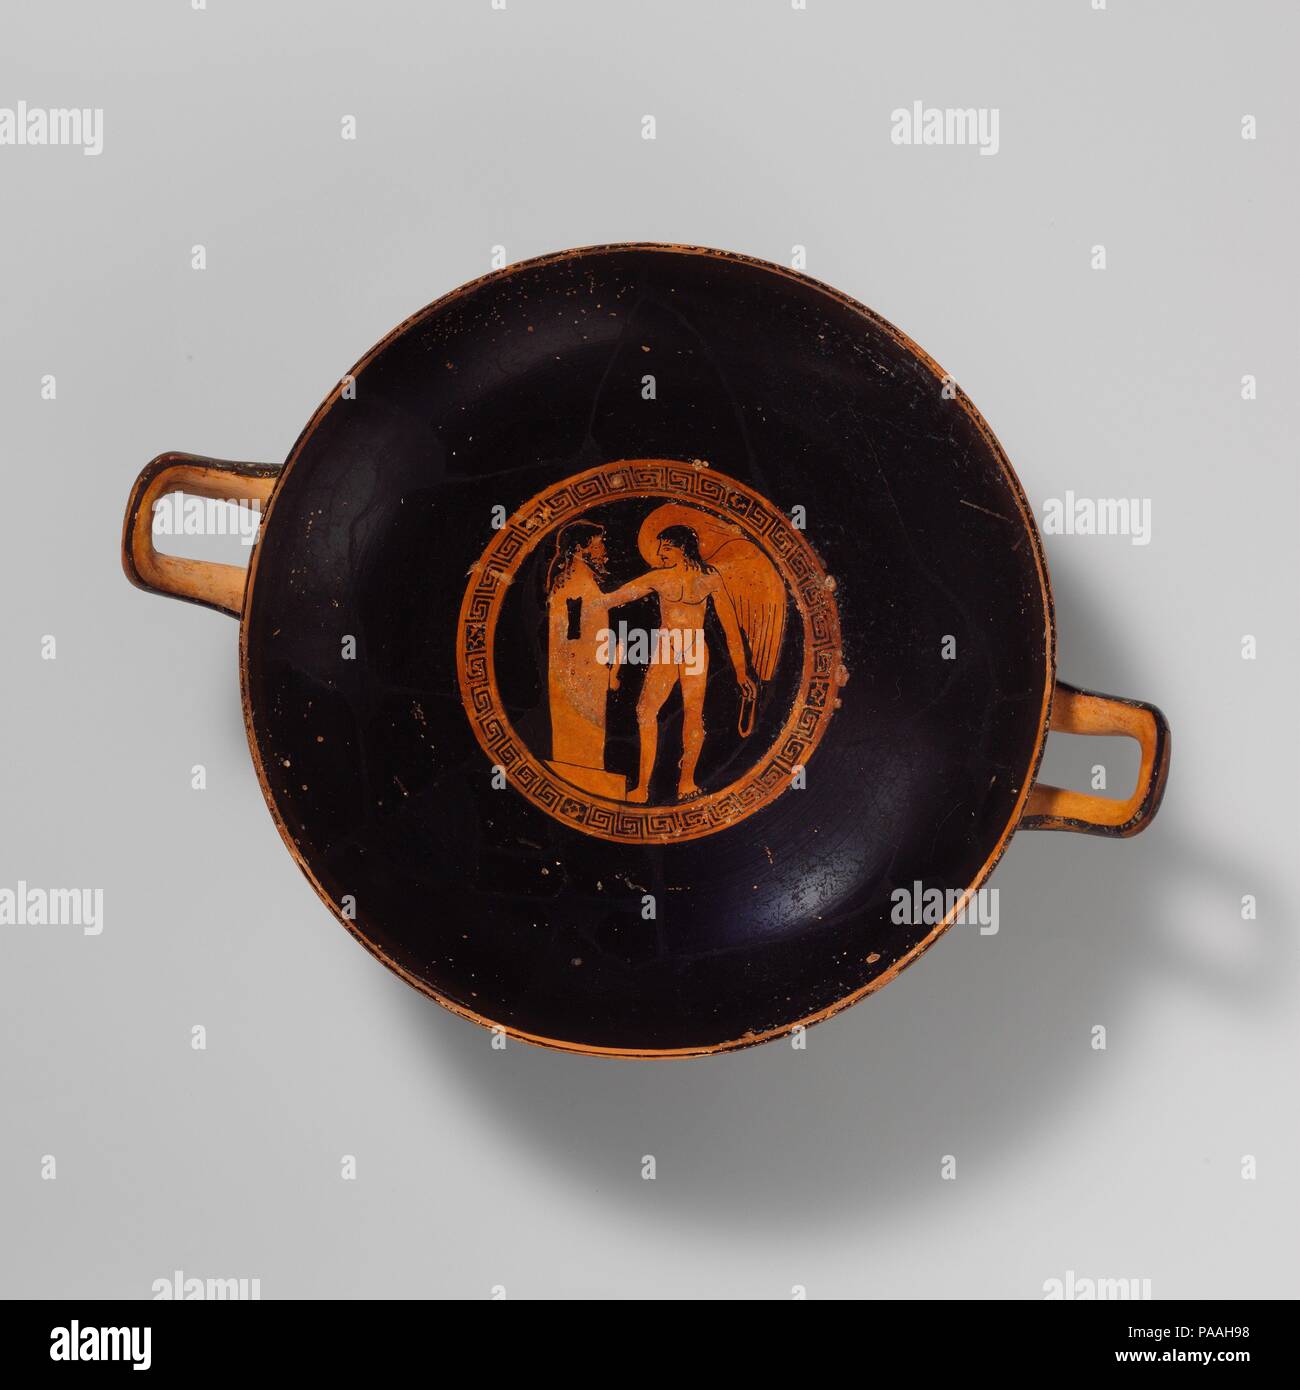 Terracotta kylix (drinking cup). Culture: Greek, Attic. Dimensions: width  11 3/4in. (29.9cm); diameter  9in. (22.9cm). Date: mid-5th century B.C..  Interior, Eros at a herm  Exterior, obverse and reverse, banqueters  The earliest herms were square stone pillars terminating in a bearded head of Hermes, the god of boundaries. They were introduced in Athens about 520 B.C by Hipparchos, the son of the tyrant Peisistratos, to mark points midway between the various Attic villages and the Athenian Agora. Soon herms stood before private houses and sanctuaries, as well. Museum: Metropolitan Museum of  Stock Photo